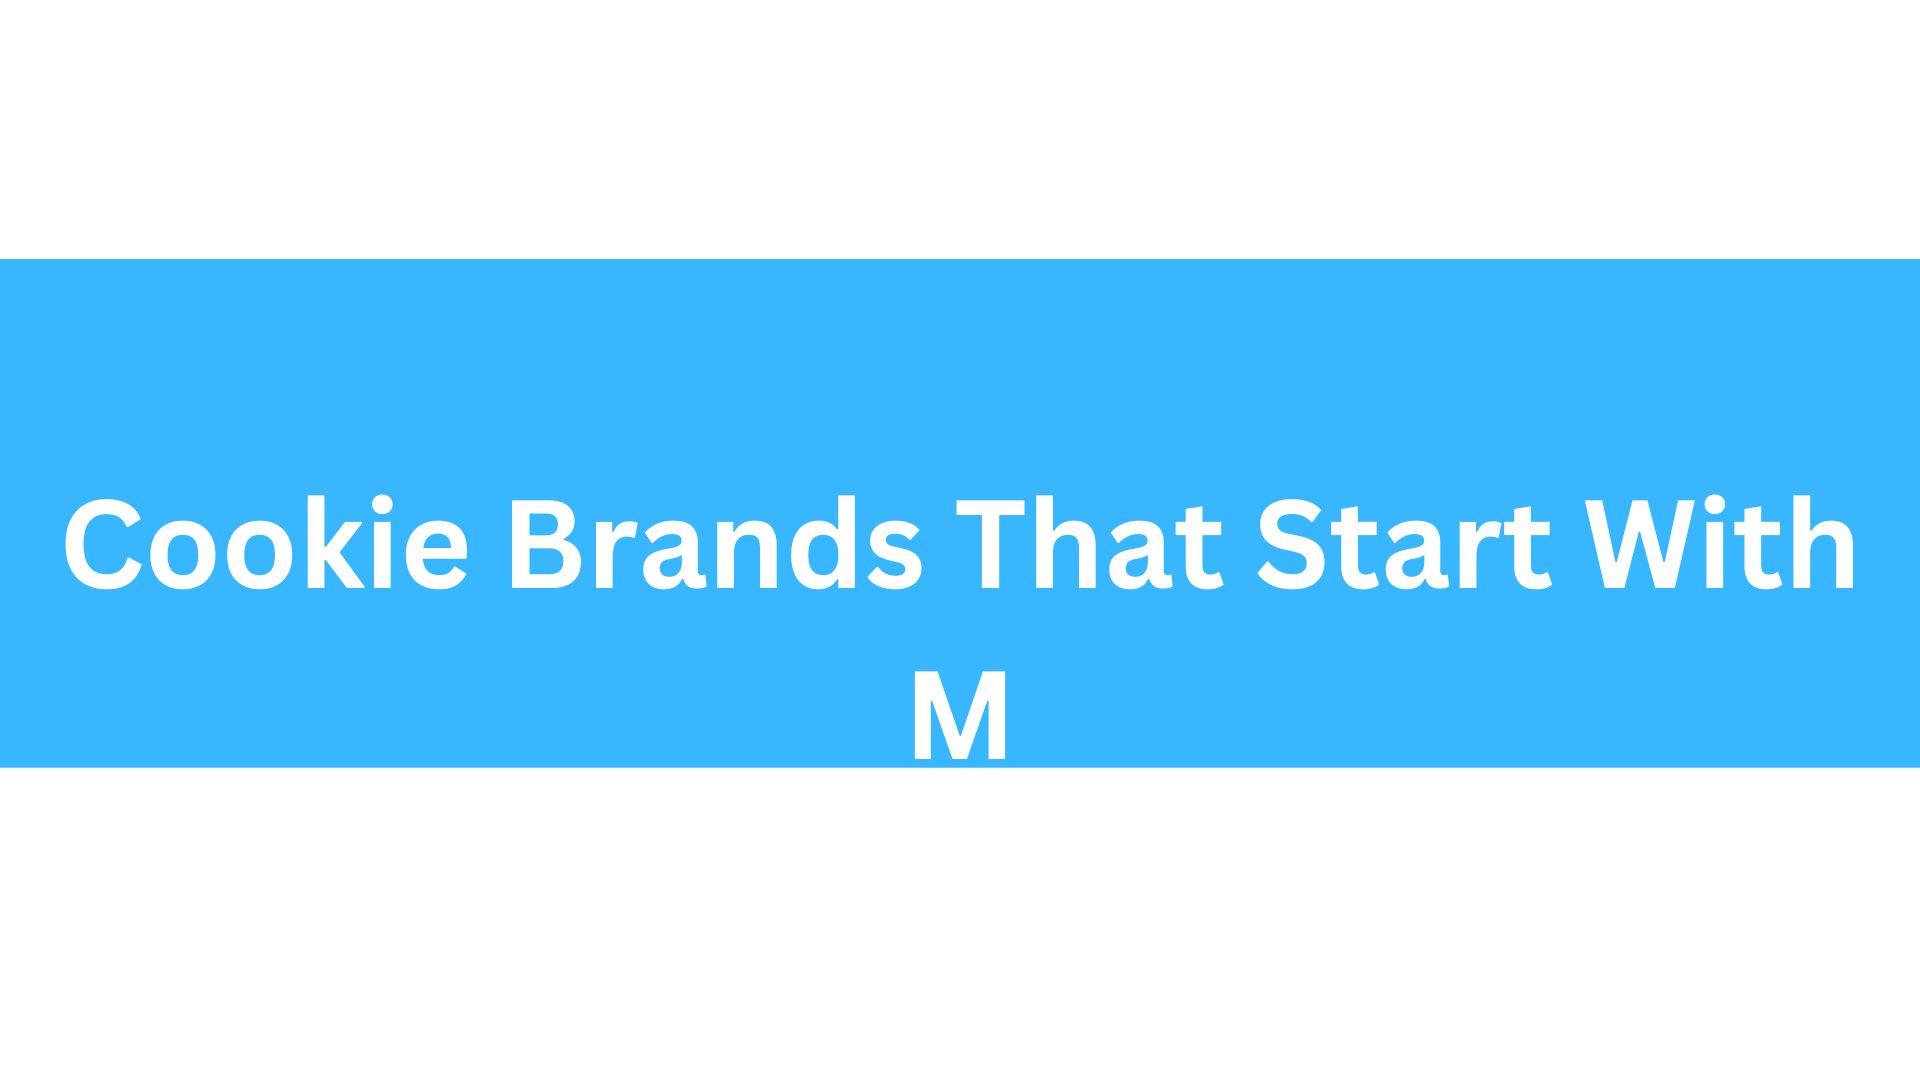 Cookie Brands That Start With M